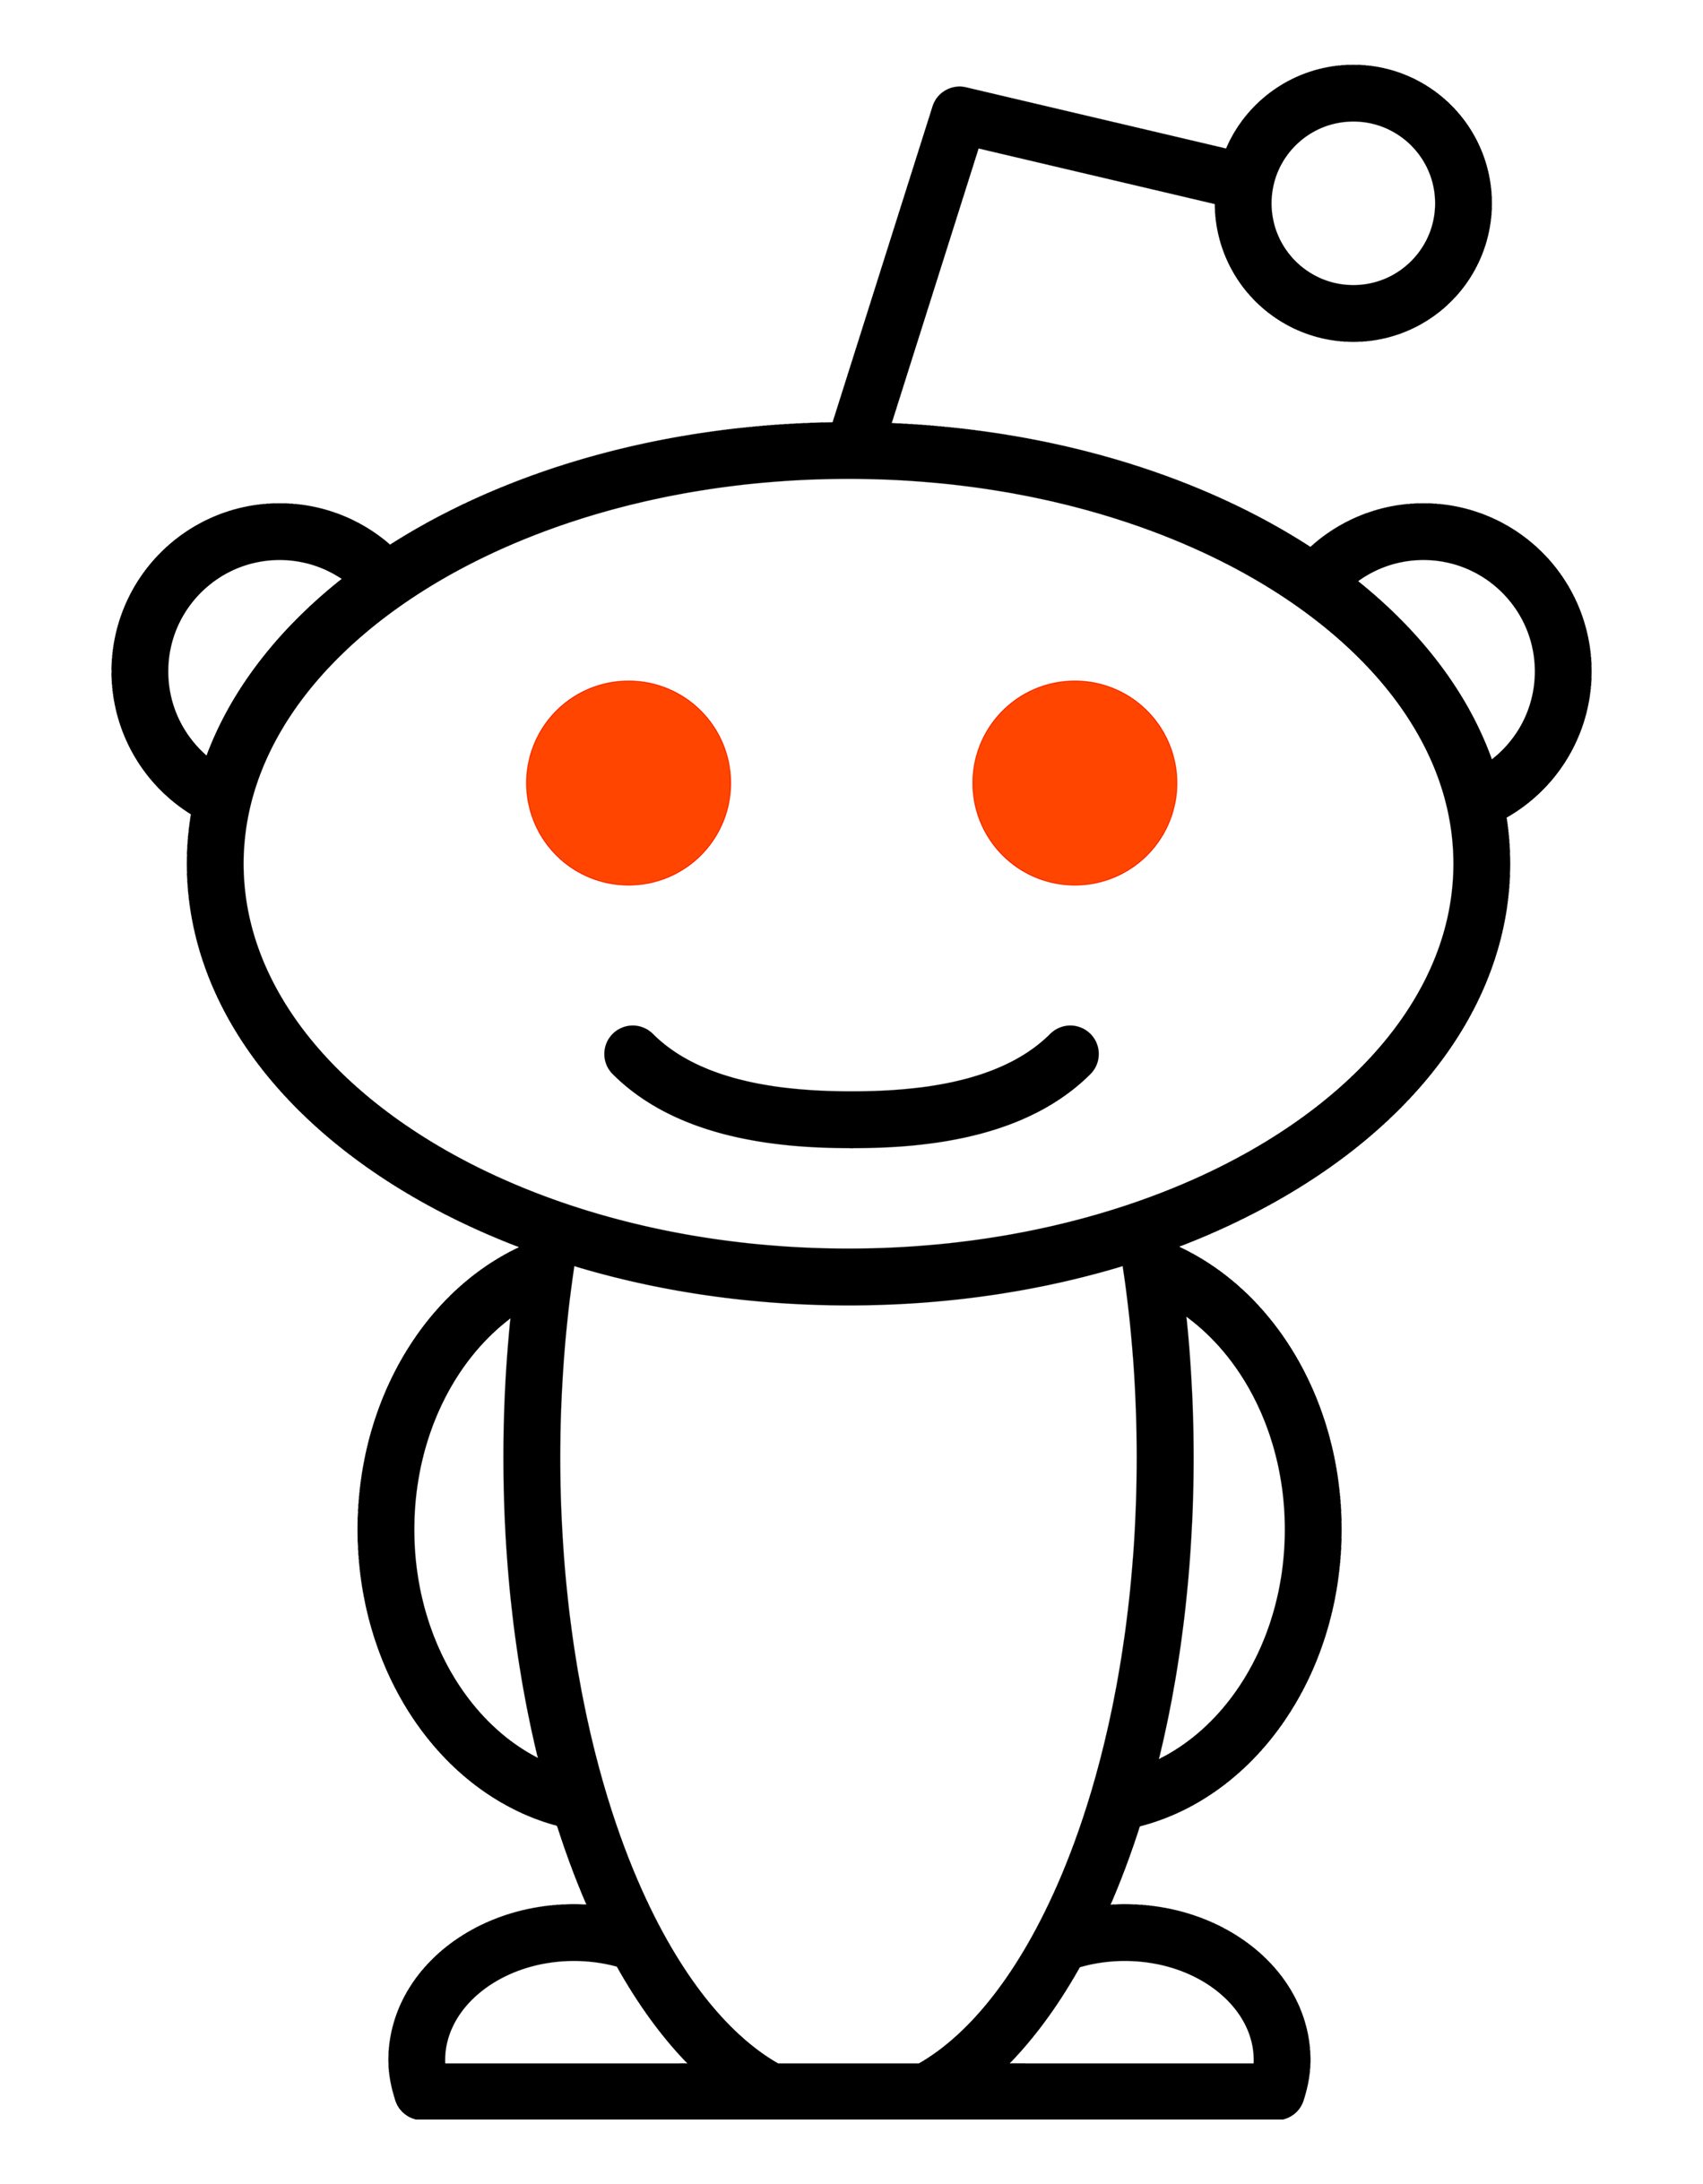 Reddit Logo and symbol, meaning, history, PNG, brand